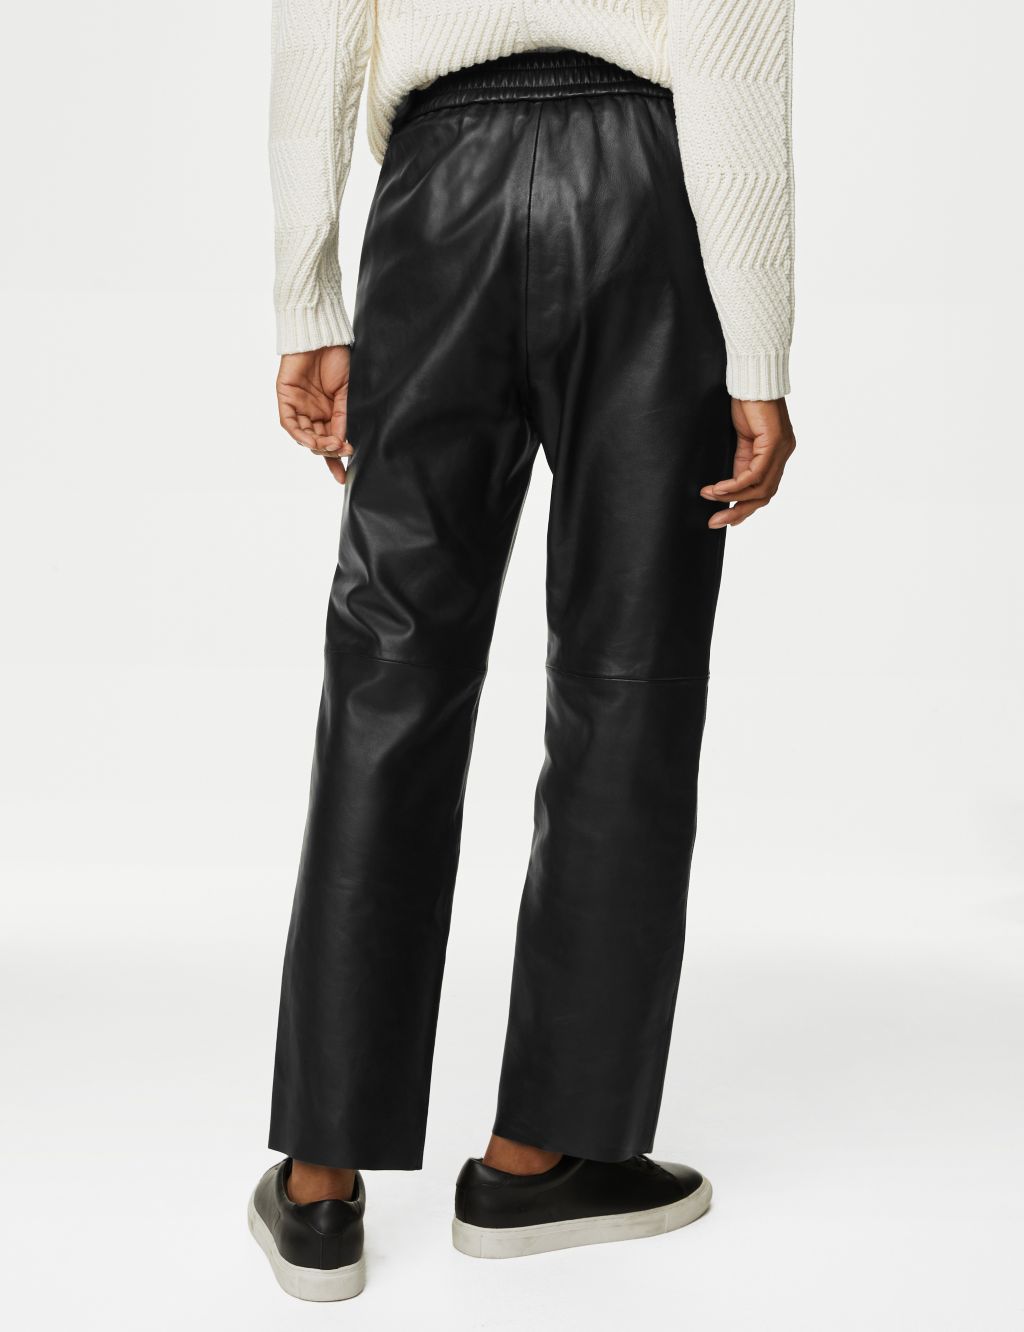 Leather Straight Leg Trousers image 5